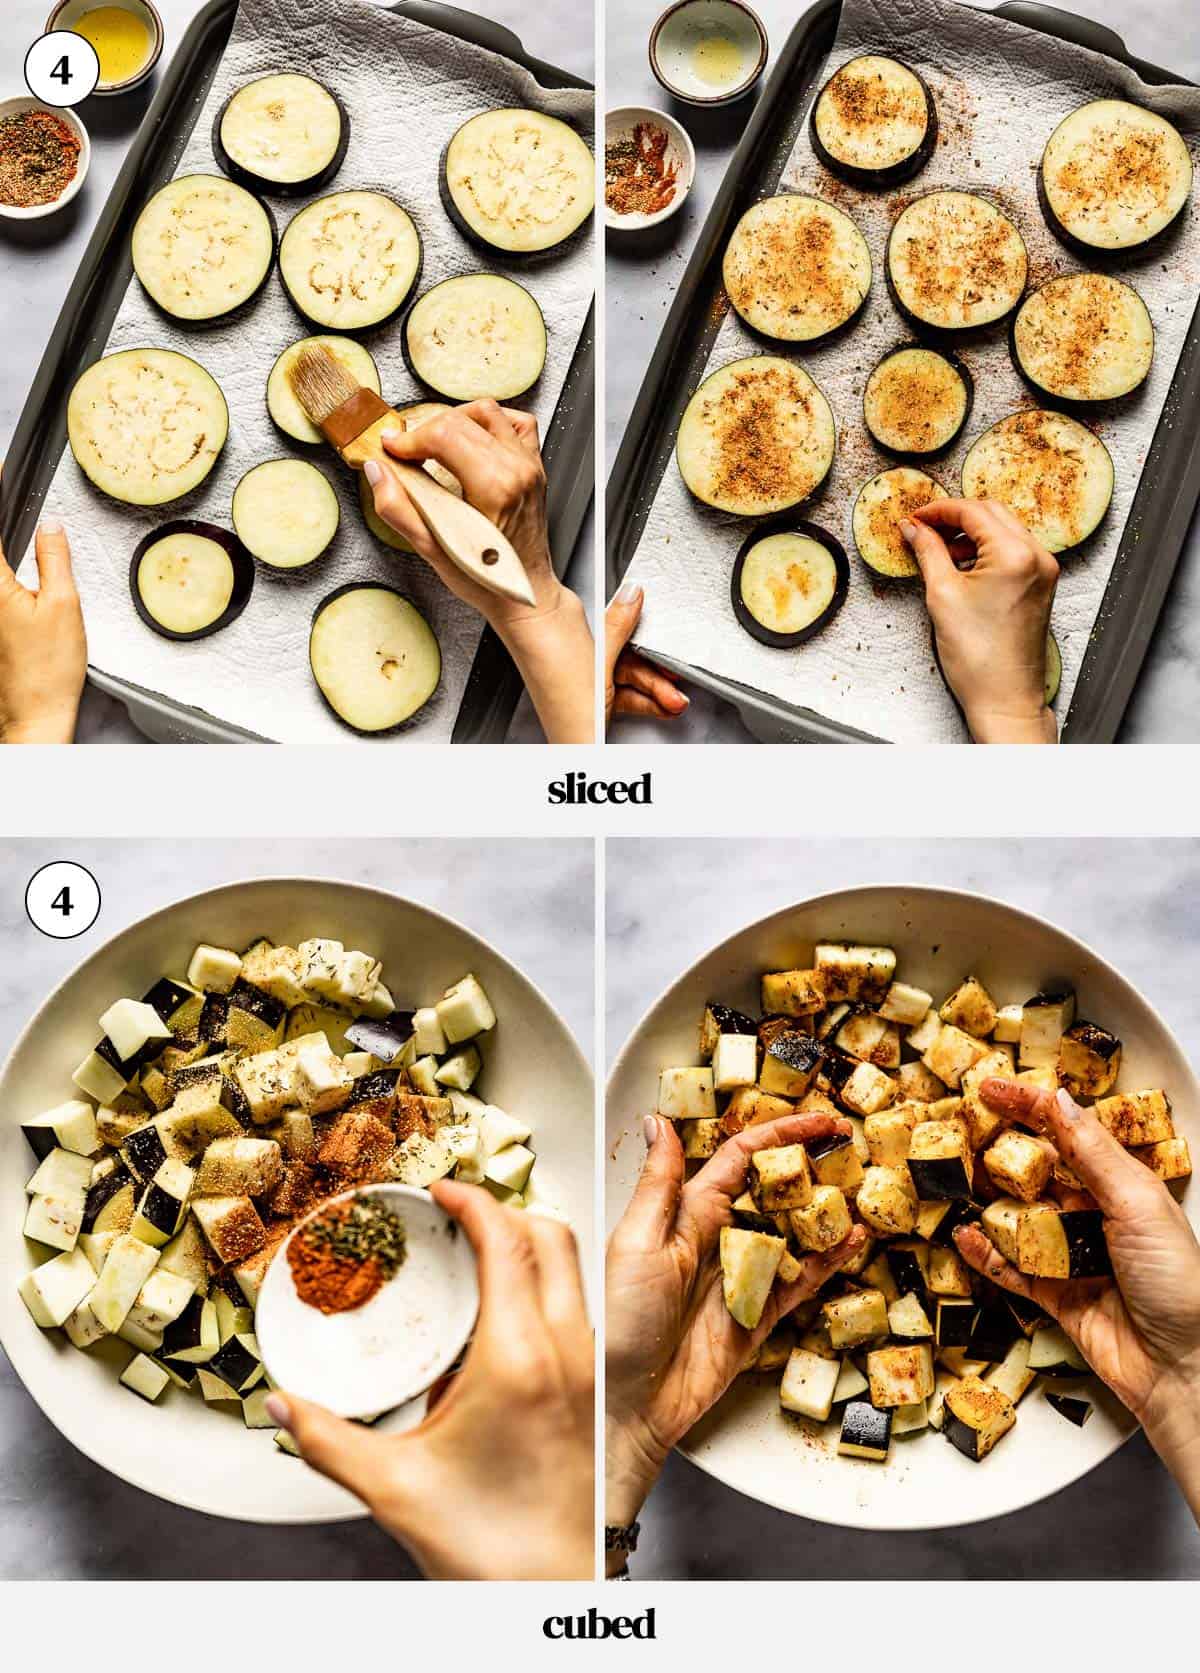 Person showing how to prepare and season eggplant in a collage of images.